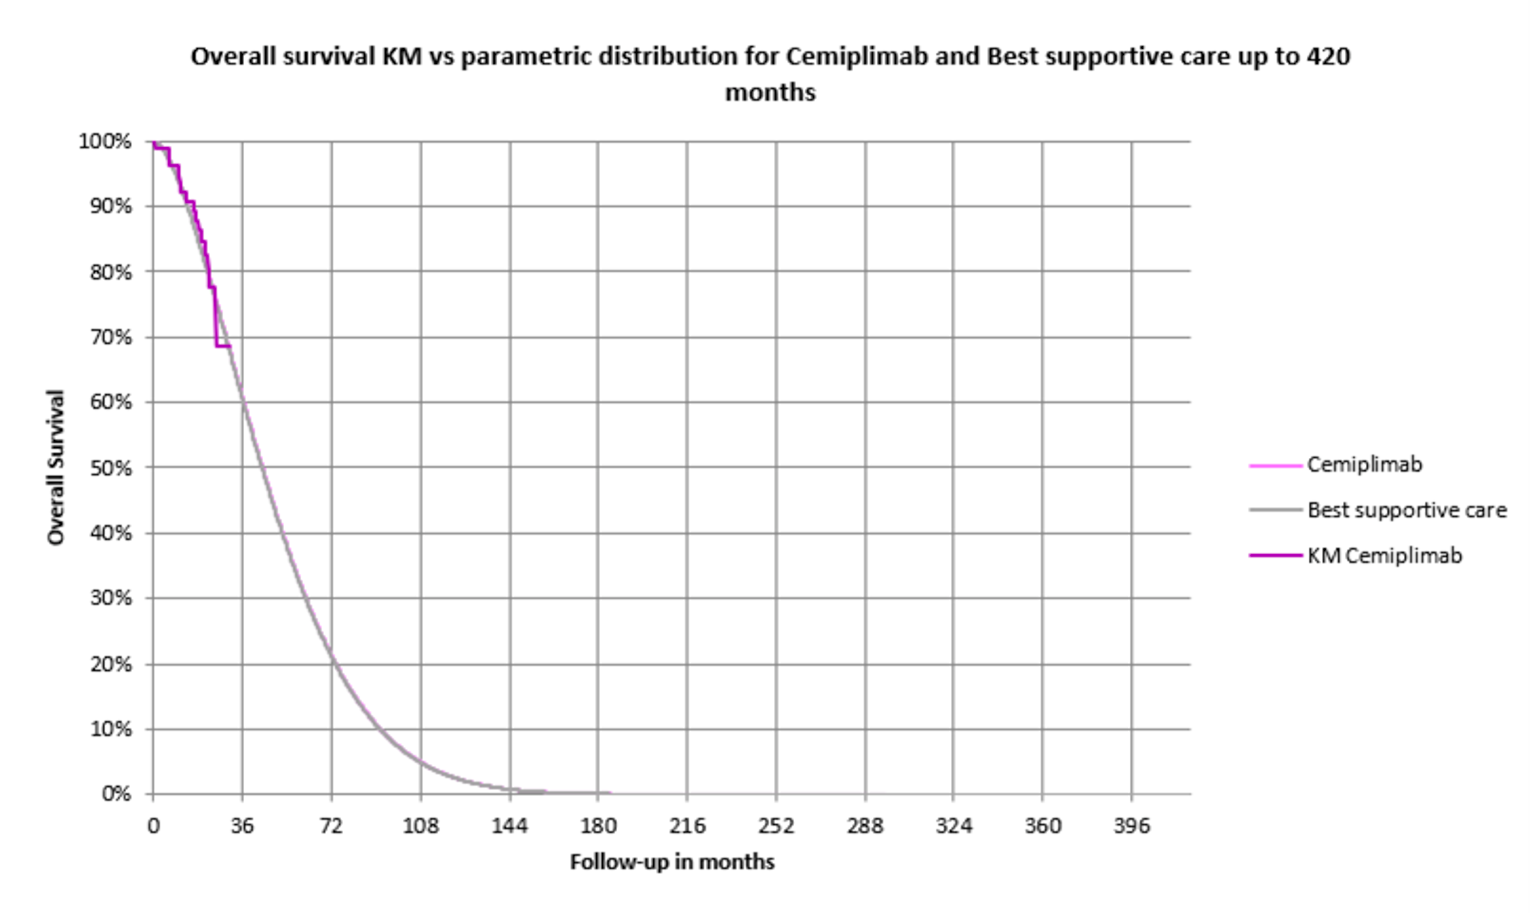 This graph shows the KM curve for OS of cemiplimab. The KM curve is based on Study 1620 (n = 84, mean age = 69). Survival curves were fitted to the KM. As CADTH assumed survival for cemiplimab and BSC are the same, the survival curves for each option are overlaid on top of each other.